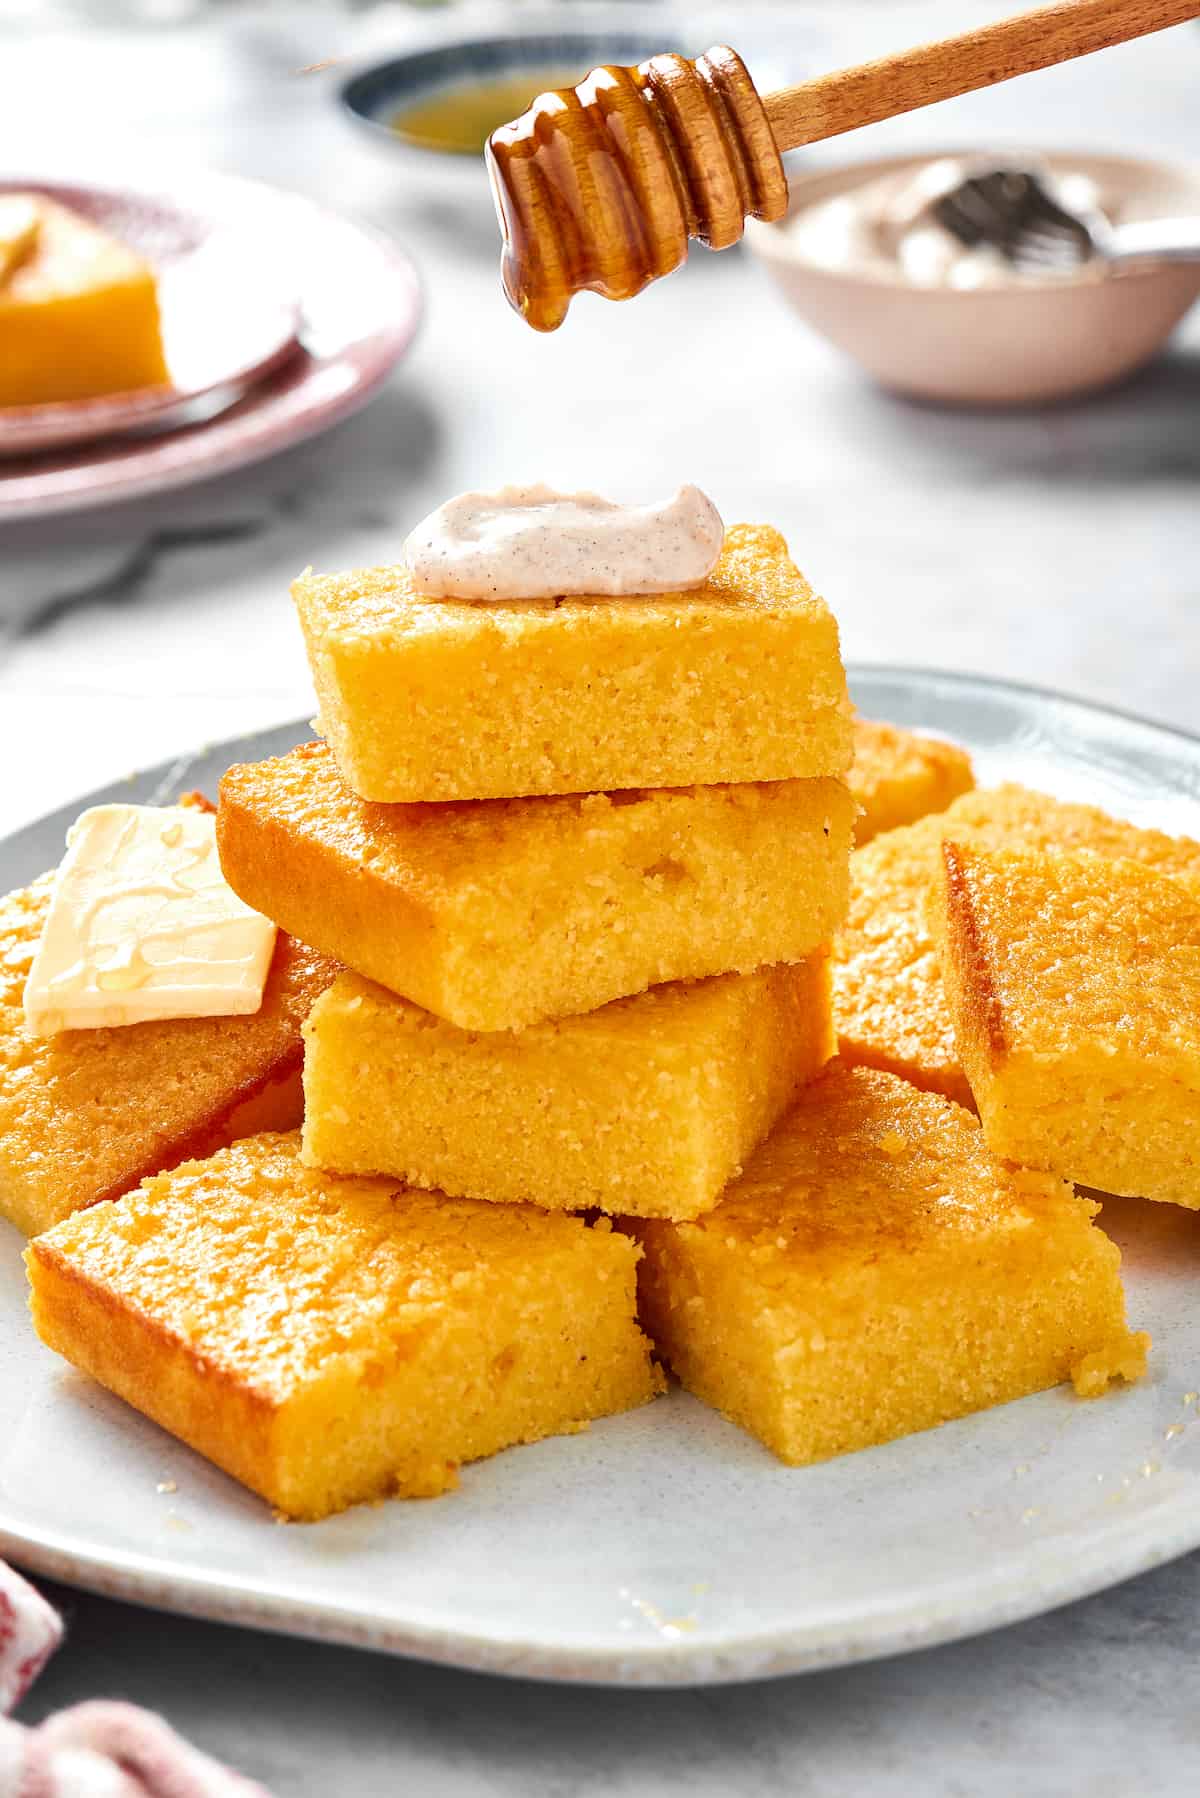 A platter of cornbread with some squares stacked on each other. The top piece of cornbread has a dollop of cinnamon cream on top and is being drizzled with honey.